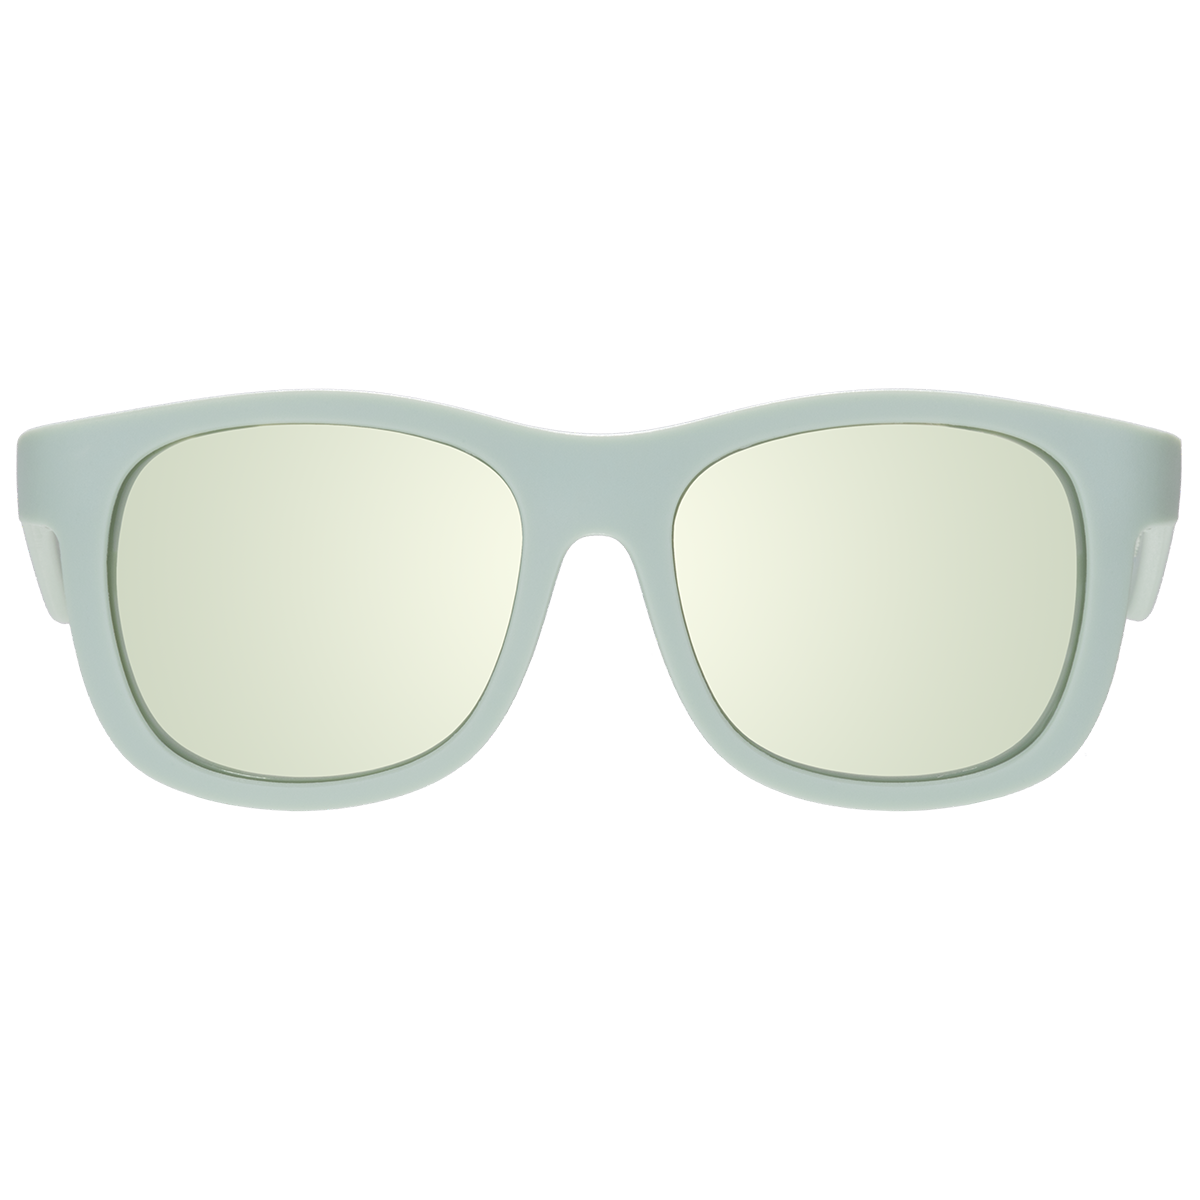 The Daydreamer-  Polarized with Mirrored Lens Babiators Sunglasses